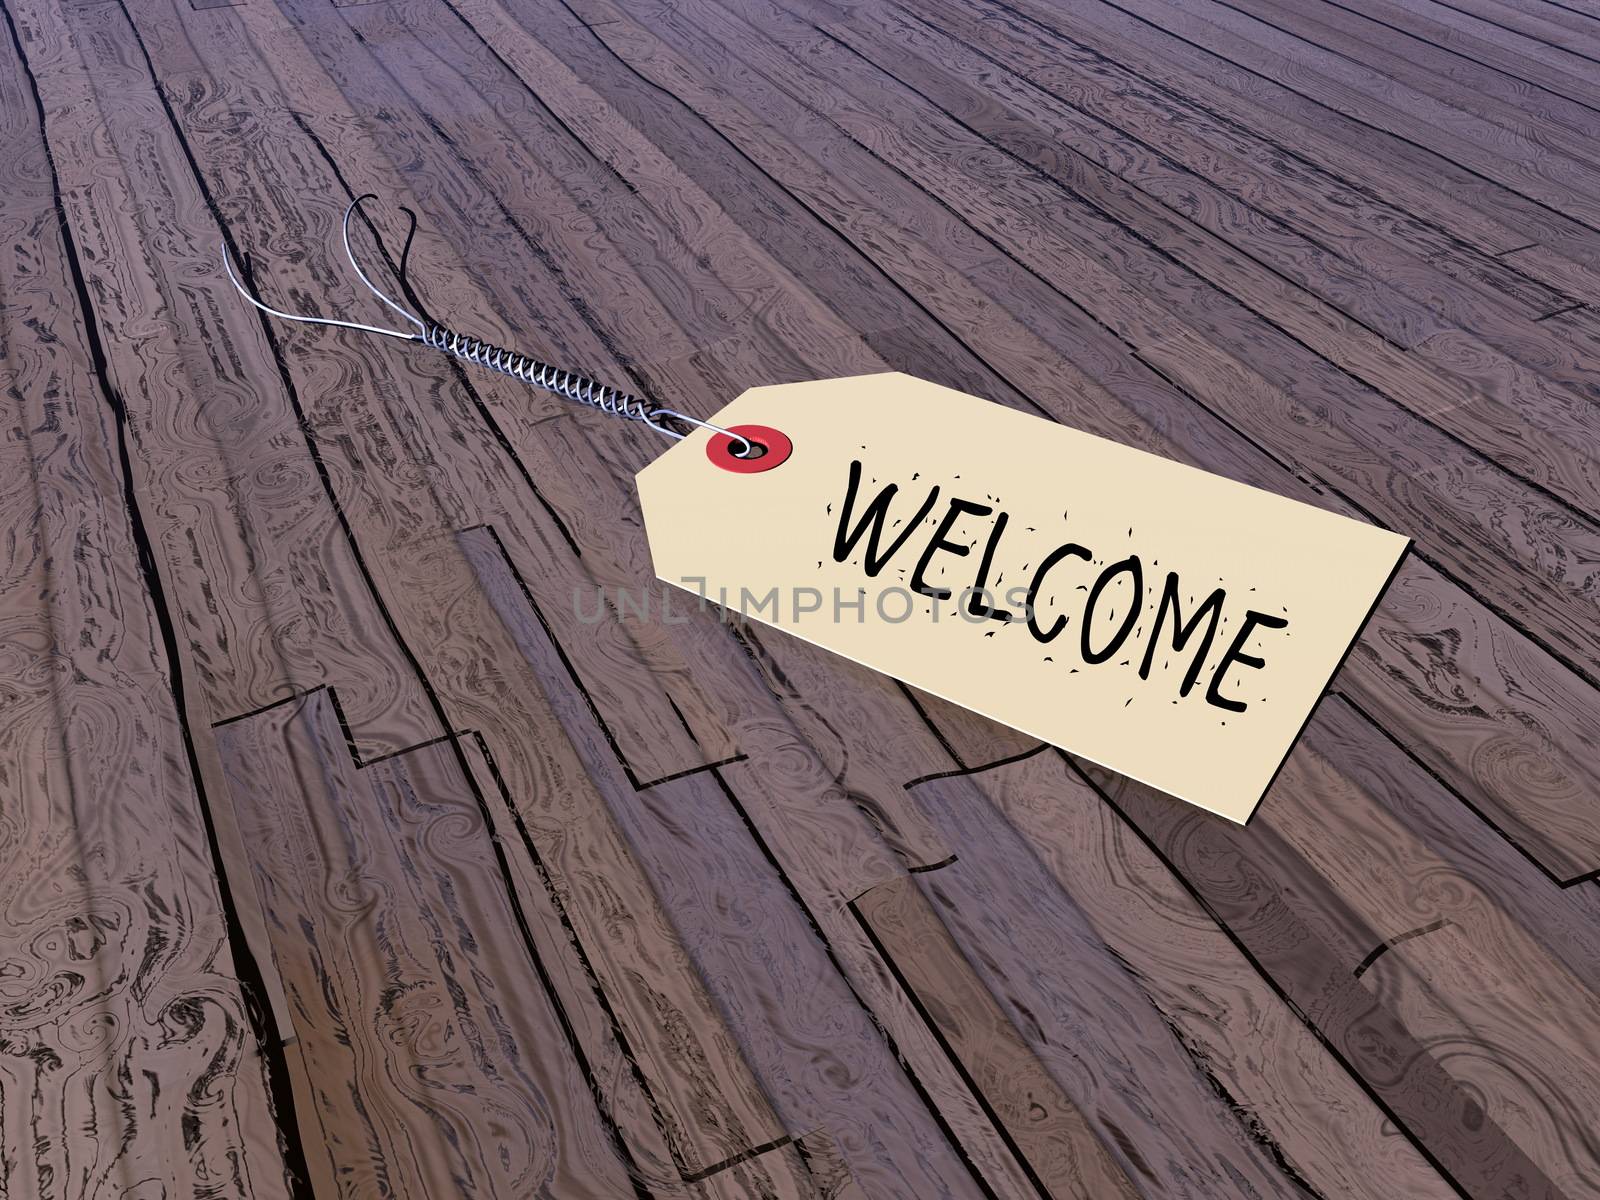 Tag for welcome - 3D render by Elenaphotos21